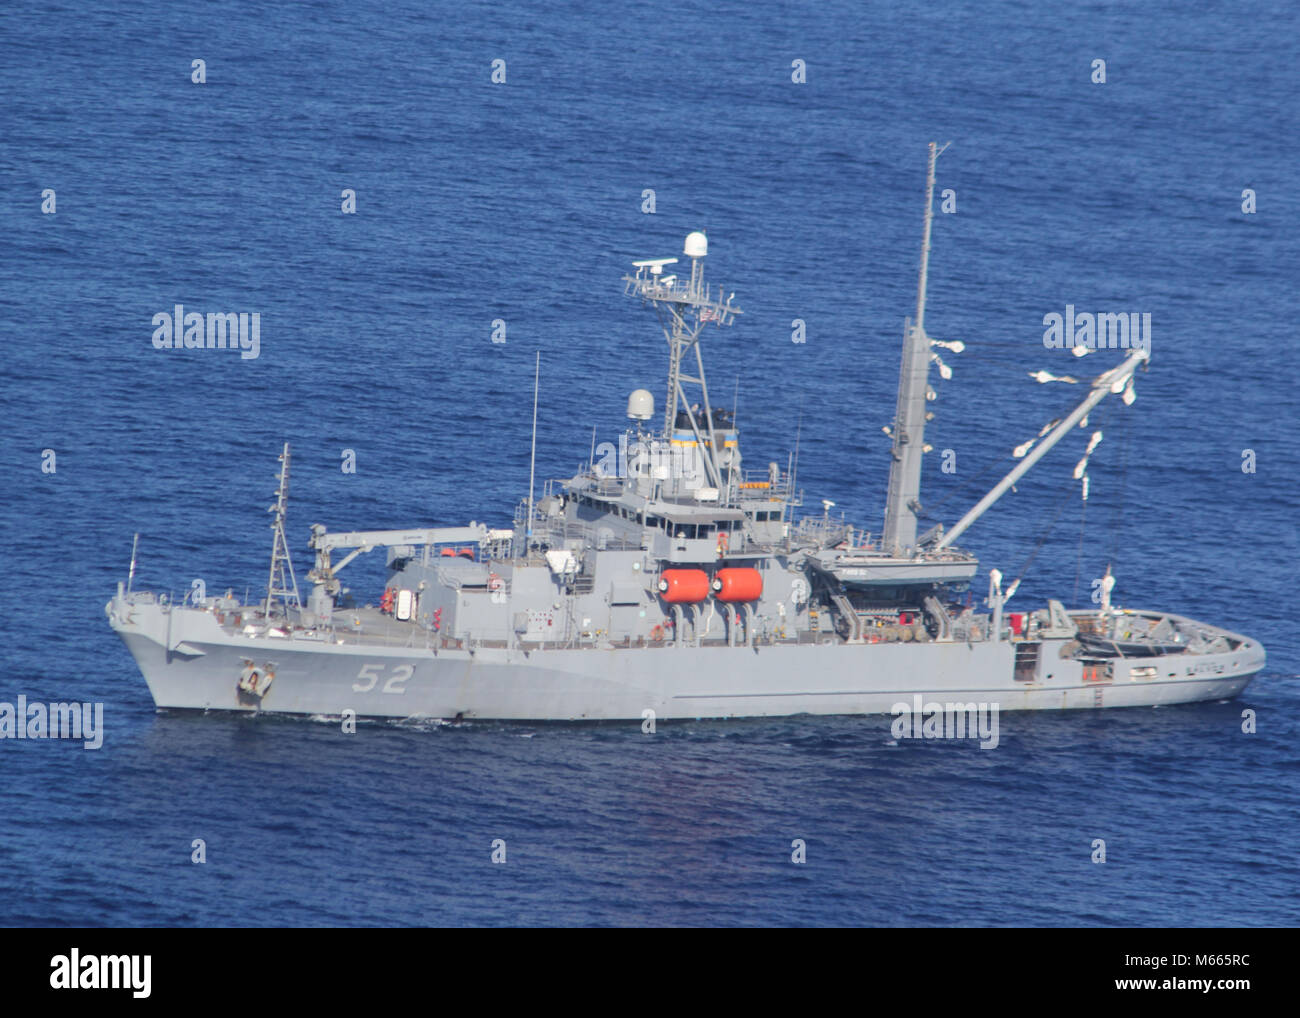 160118-G-ZZ999-025 OAHU, HAWAII (Jan. 18, 2018) The Military Sealift Command Safeguard-class salvage ship USNS Salvor (T-ARS 52) serves as a support platform for Mobile Diving and Salvage Unit (MDSU) 1 , conducting underwater searches in the last known position of two Marine Corps CH-53E Super Stallion helicopters off the North Shore of Oahu. MDSU-1 is equipped with side scan sonar and a remotely operated vehicle. (U.S. Coast Guard photo by Air Station Barbers Point Public Affairs/Released) Stock Photo